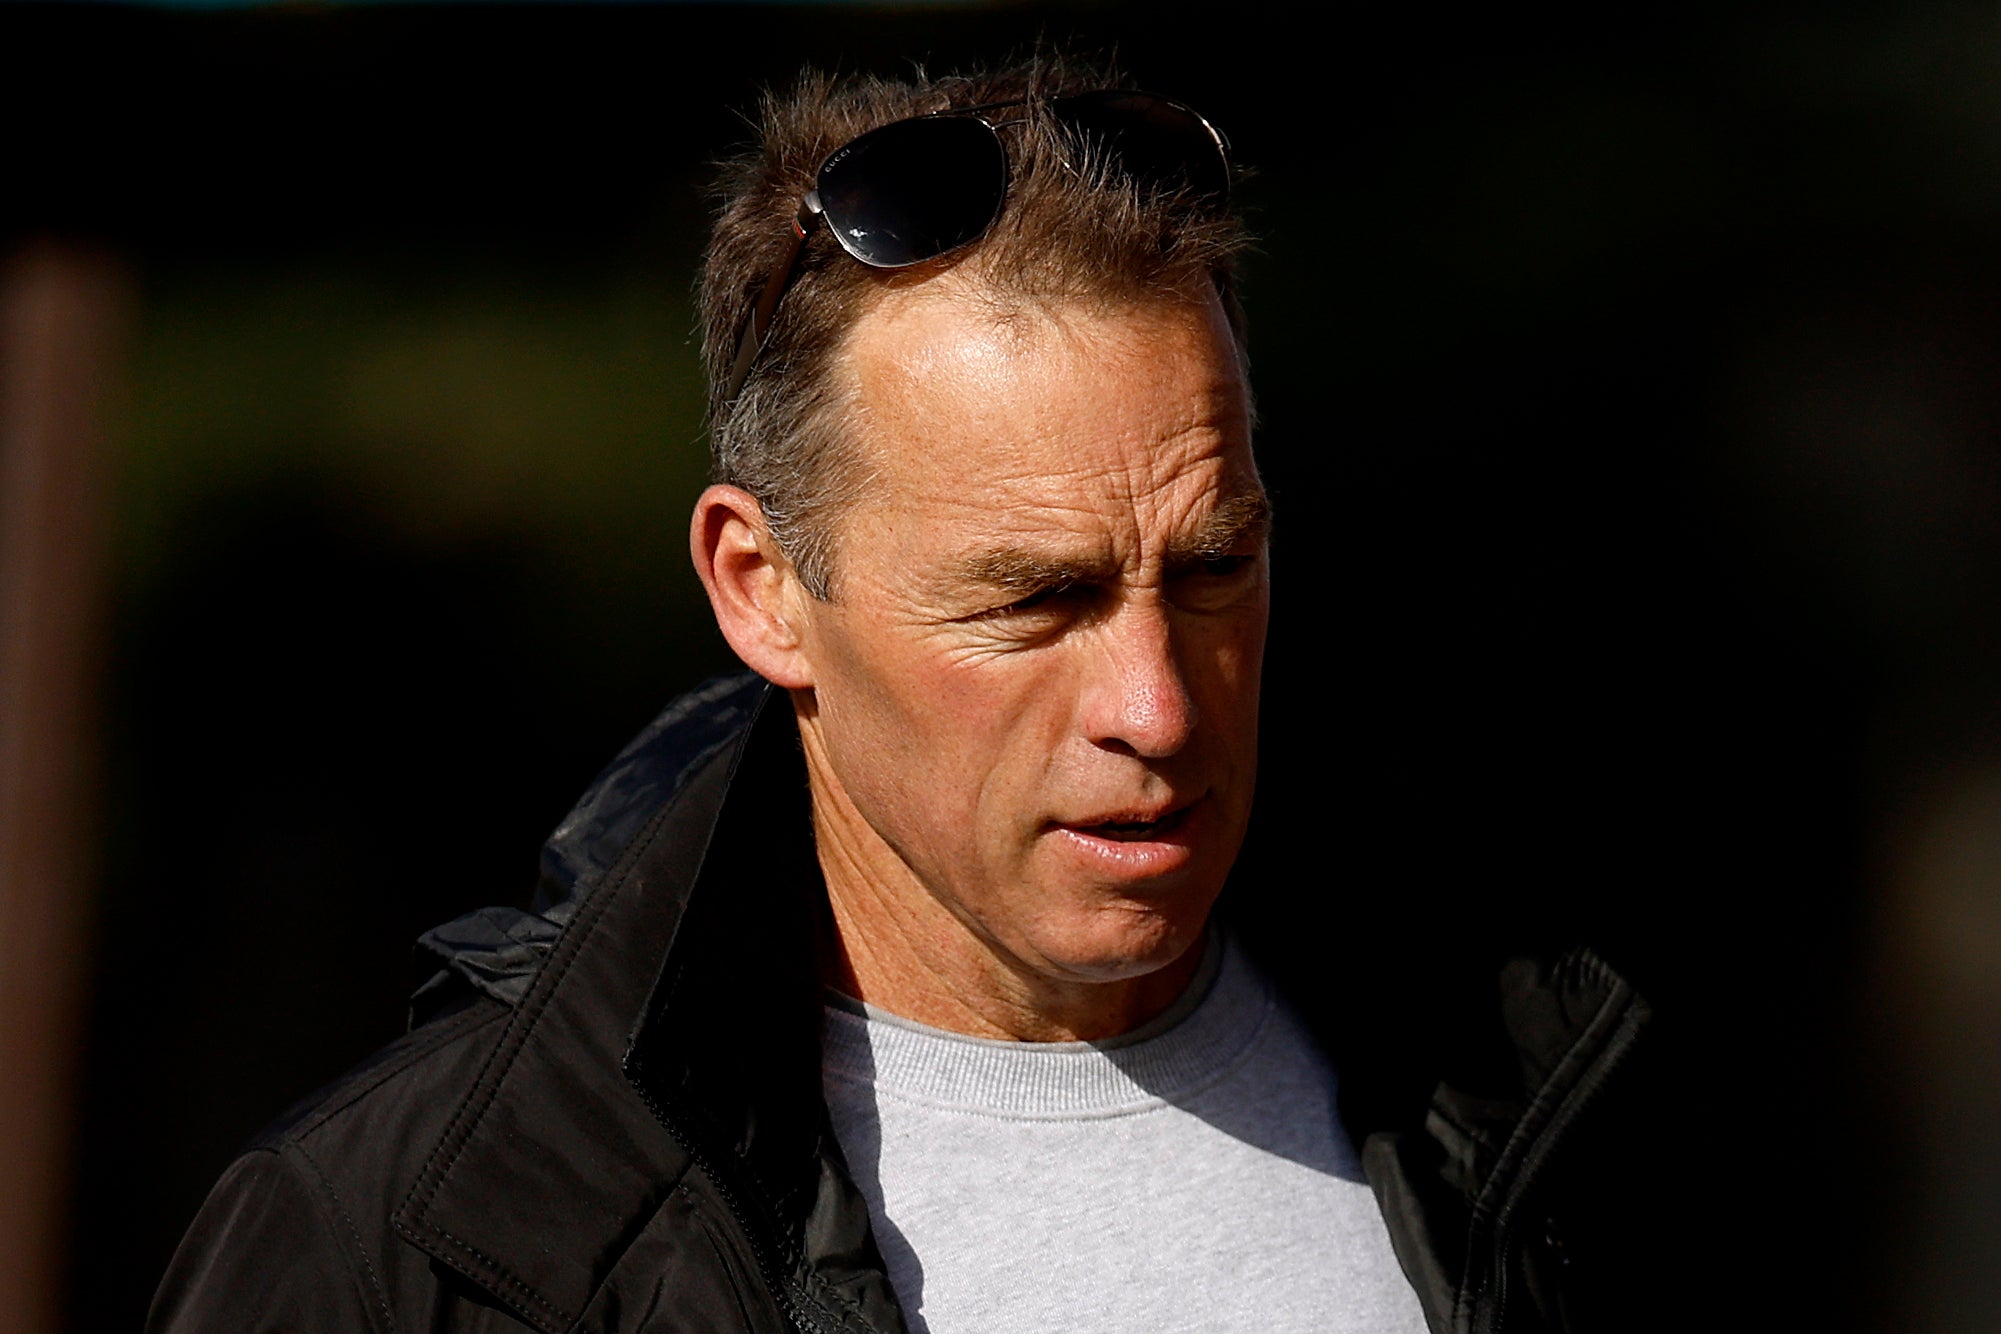 Former head coach Alastair Clarkson is one of those under investigation